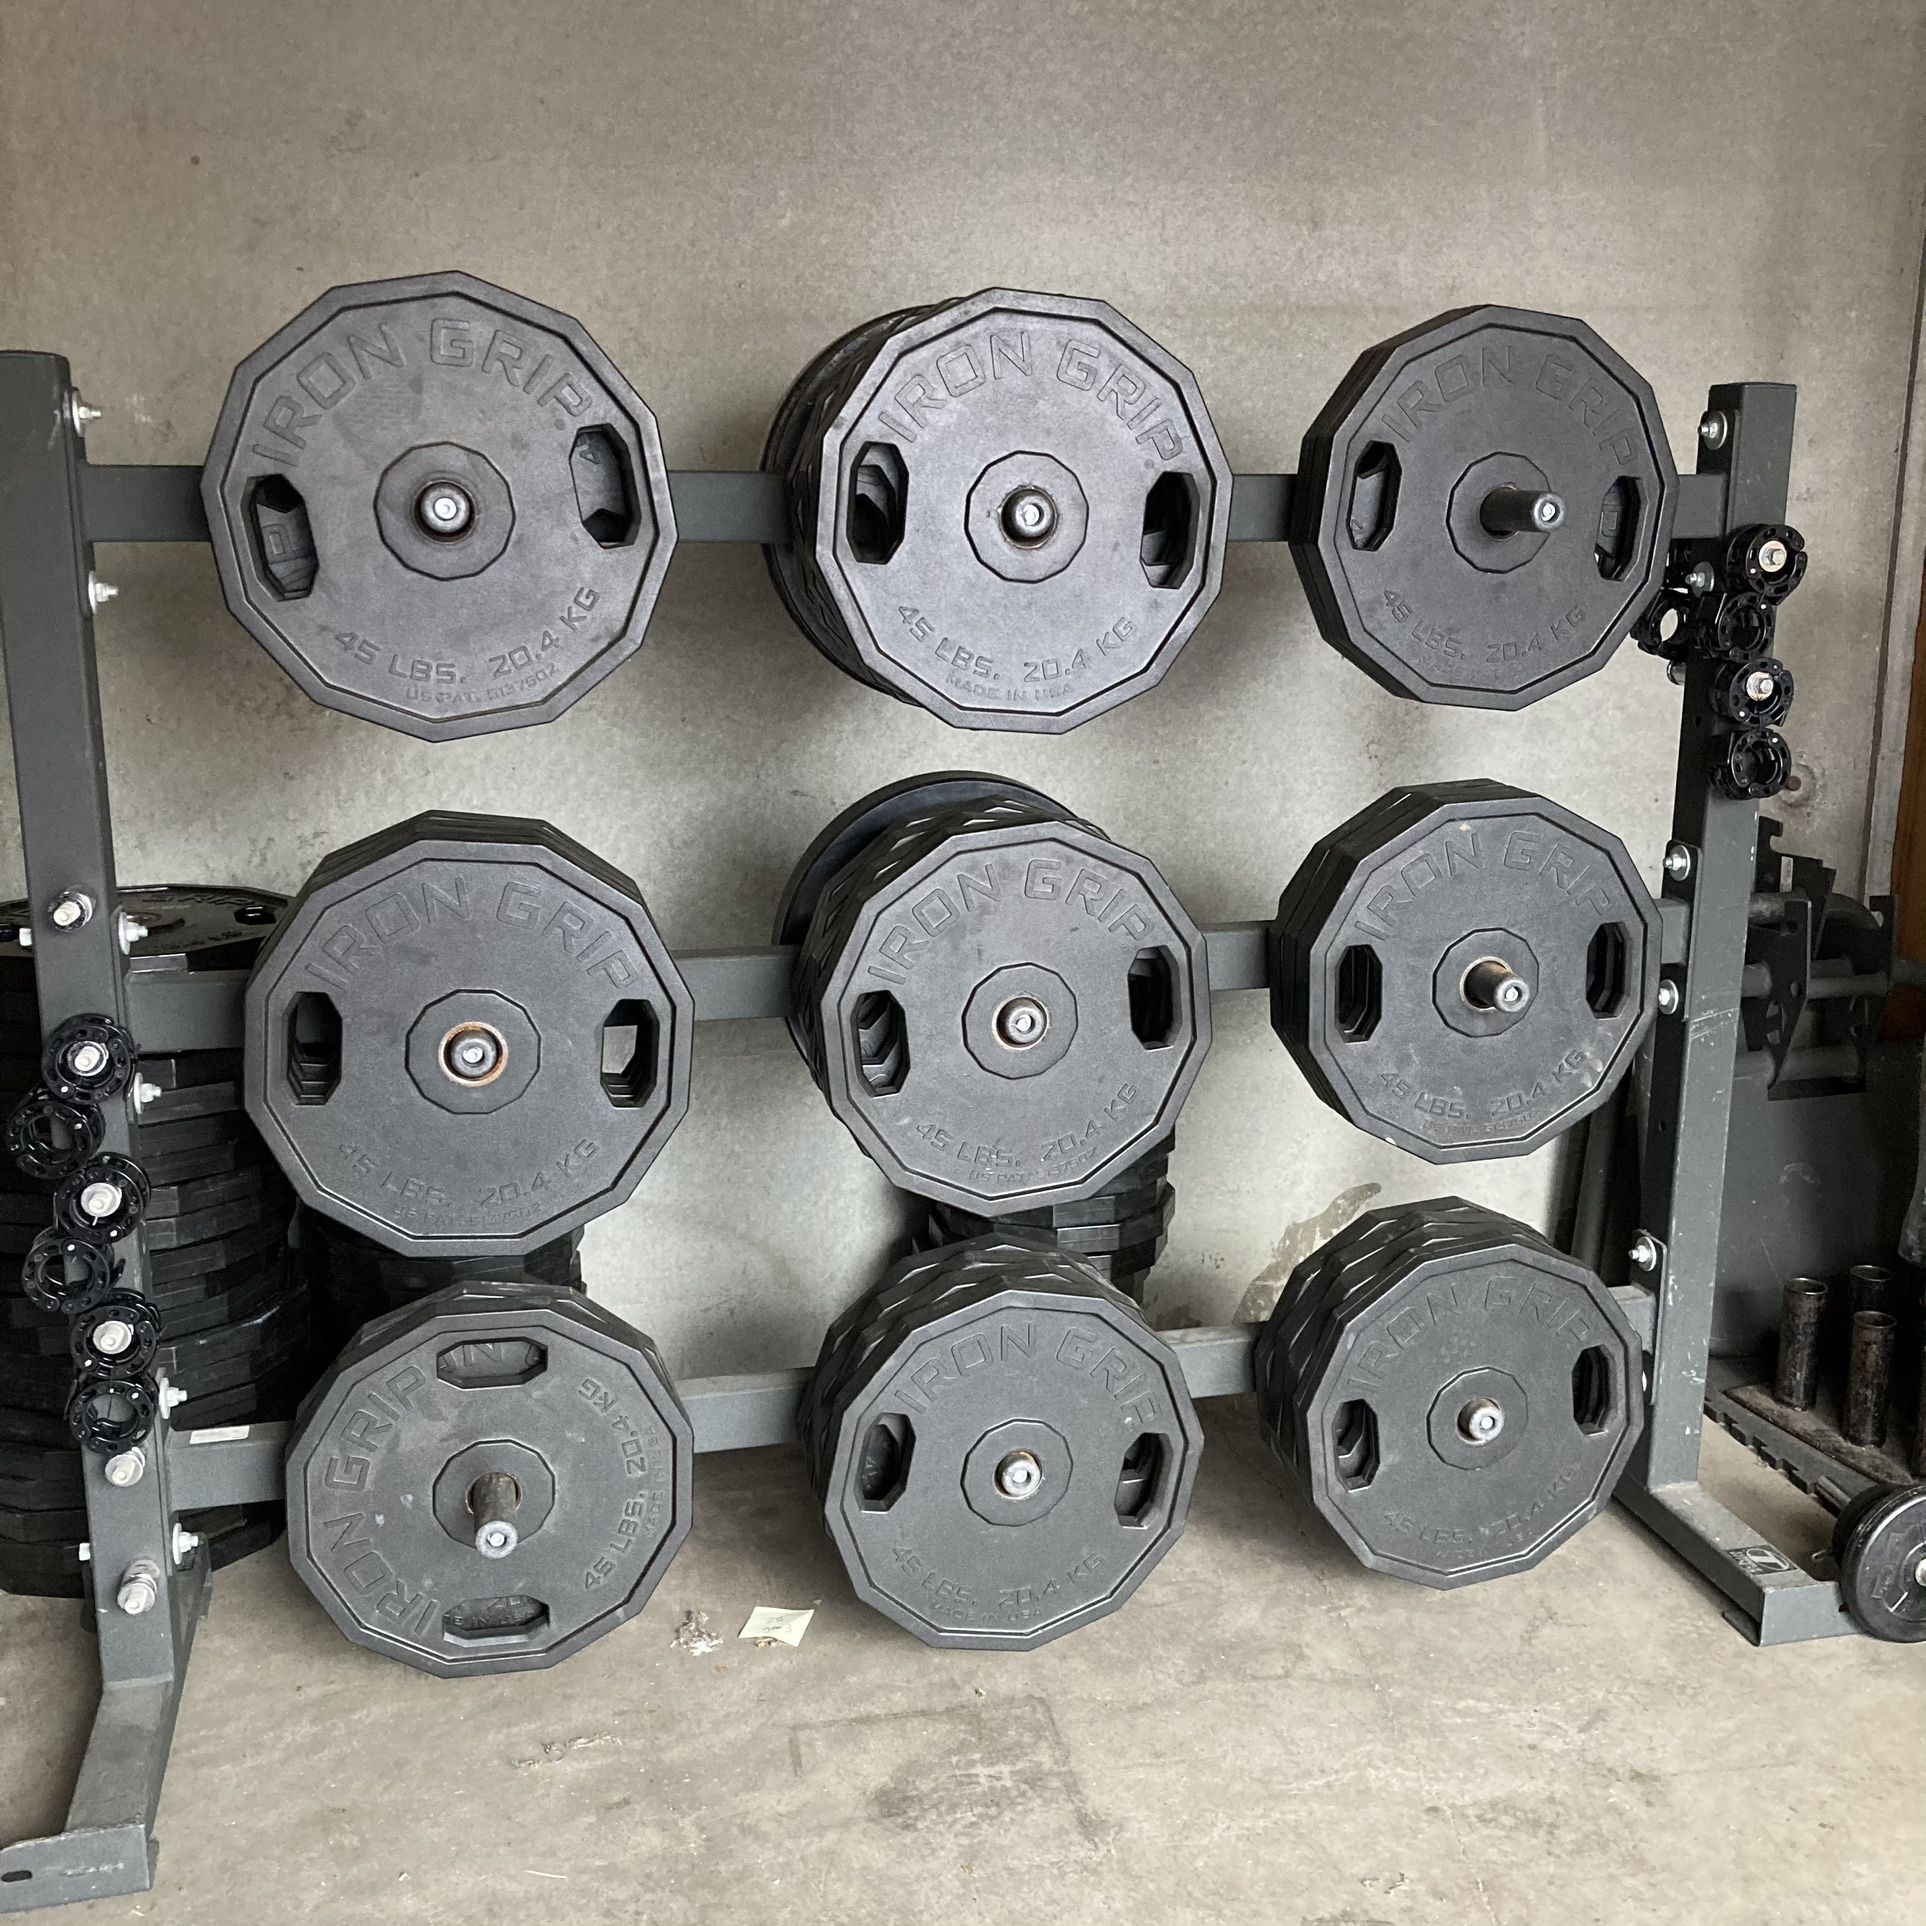 Weights, Bars - 45s, 35s, Olympic Bars, Olympic Curl Bars 